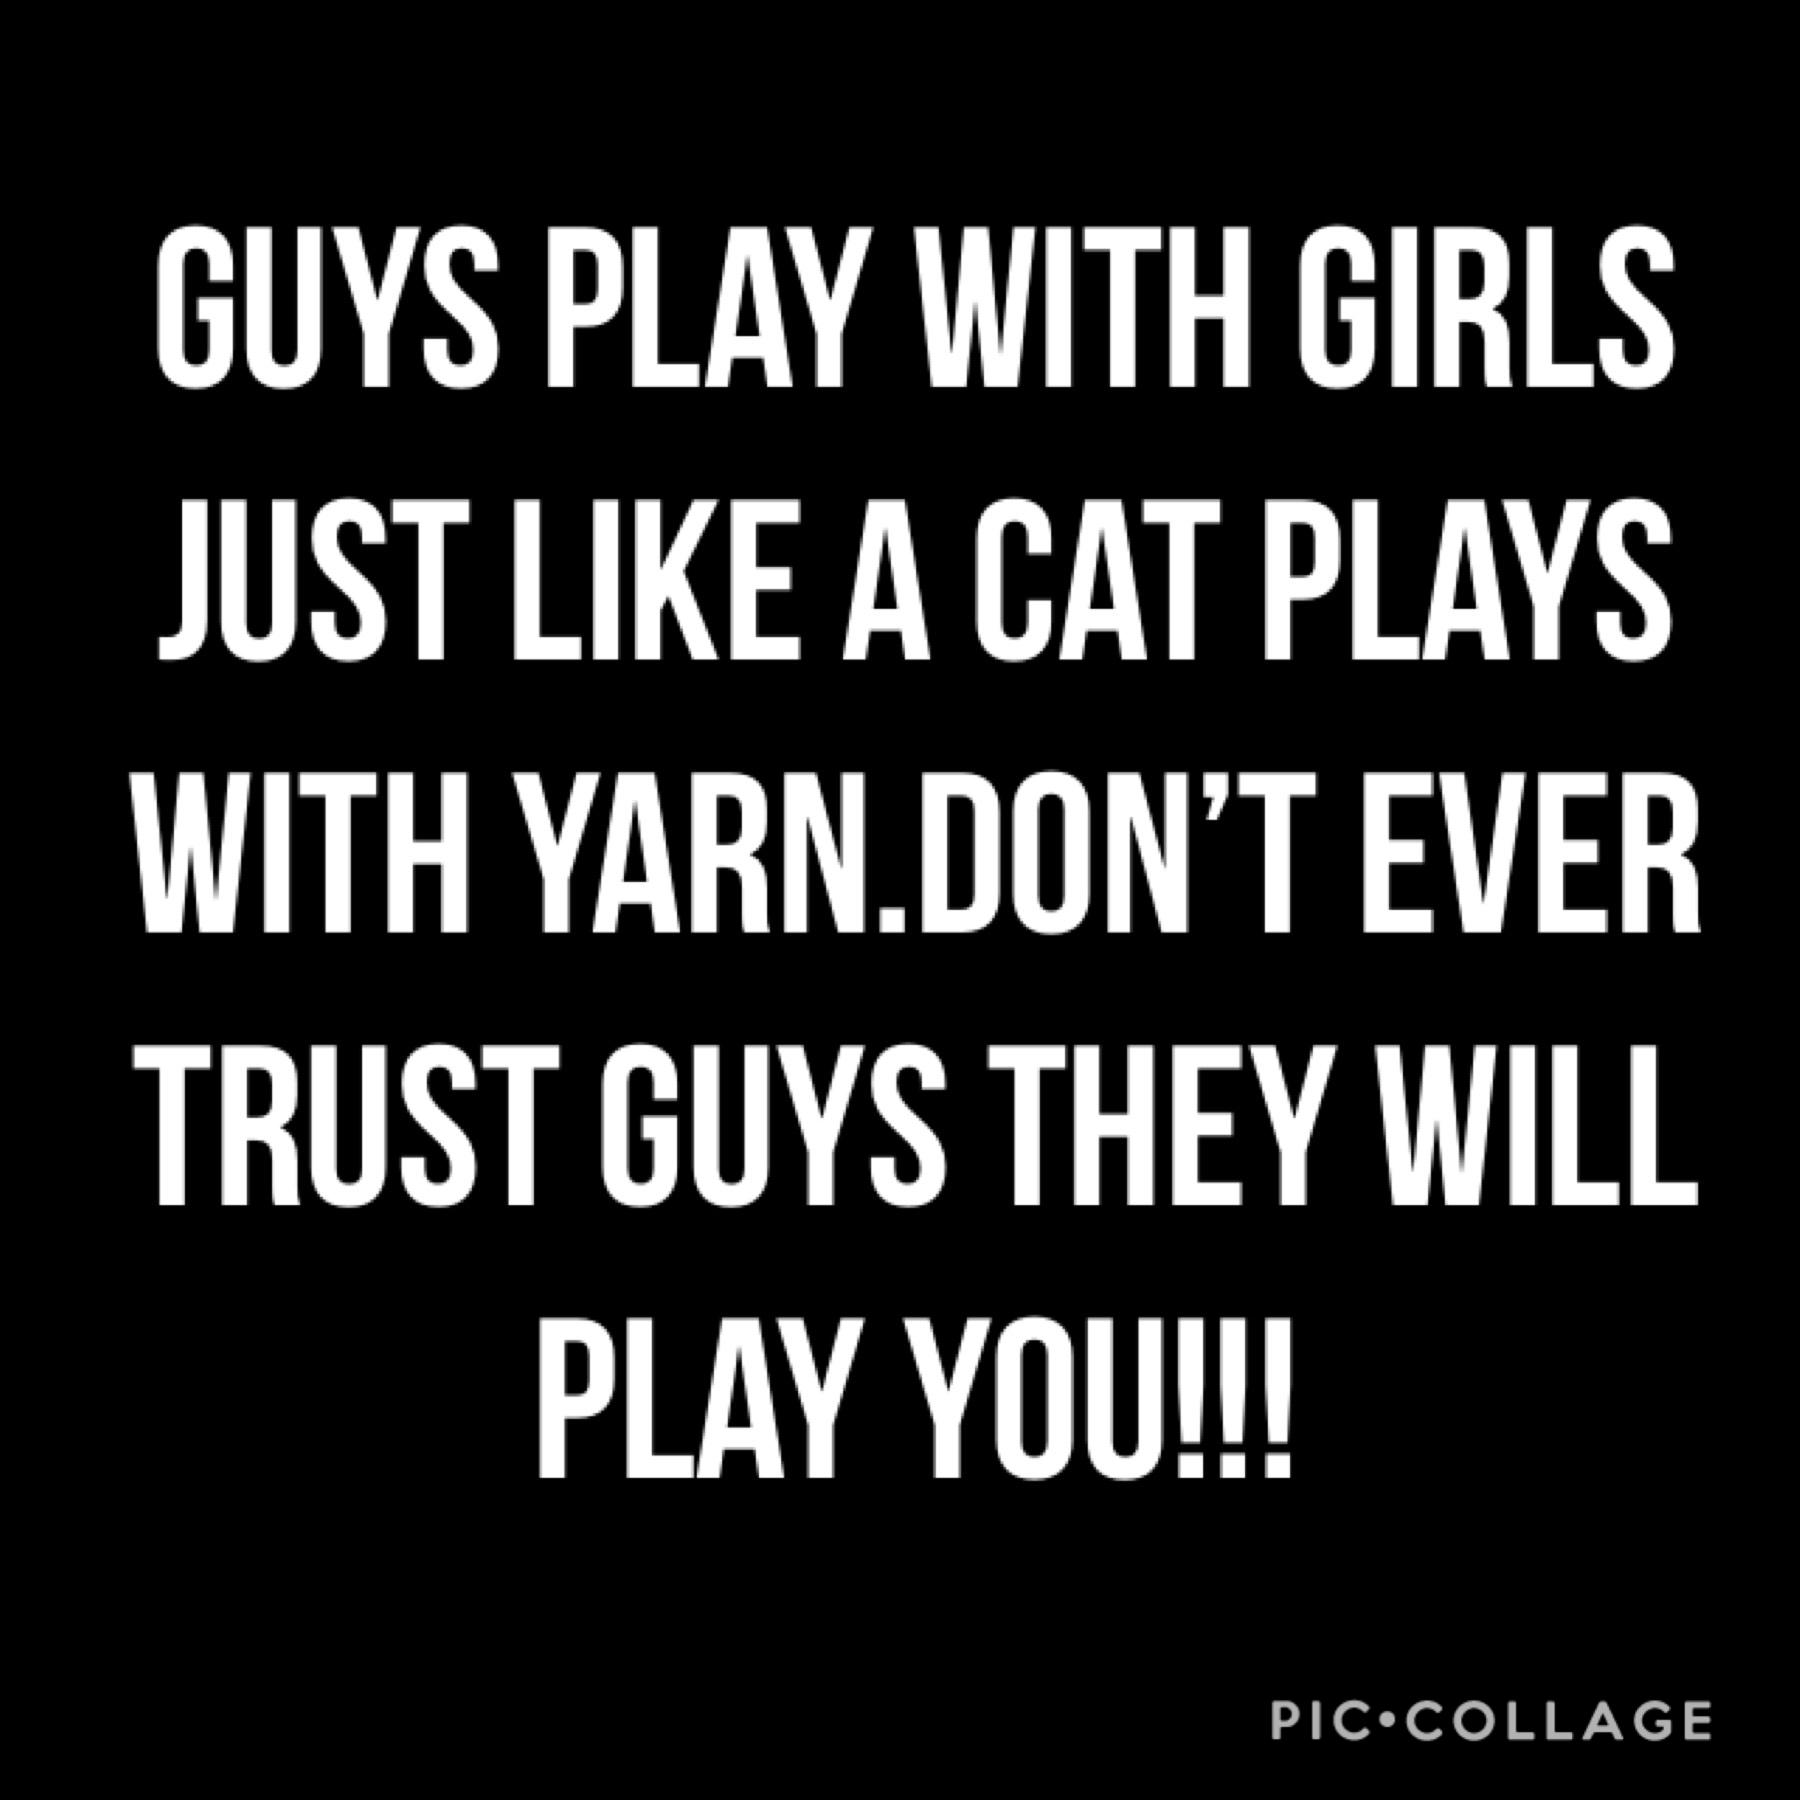 Guys play with you like cats play with yarn 